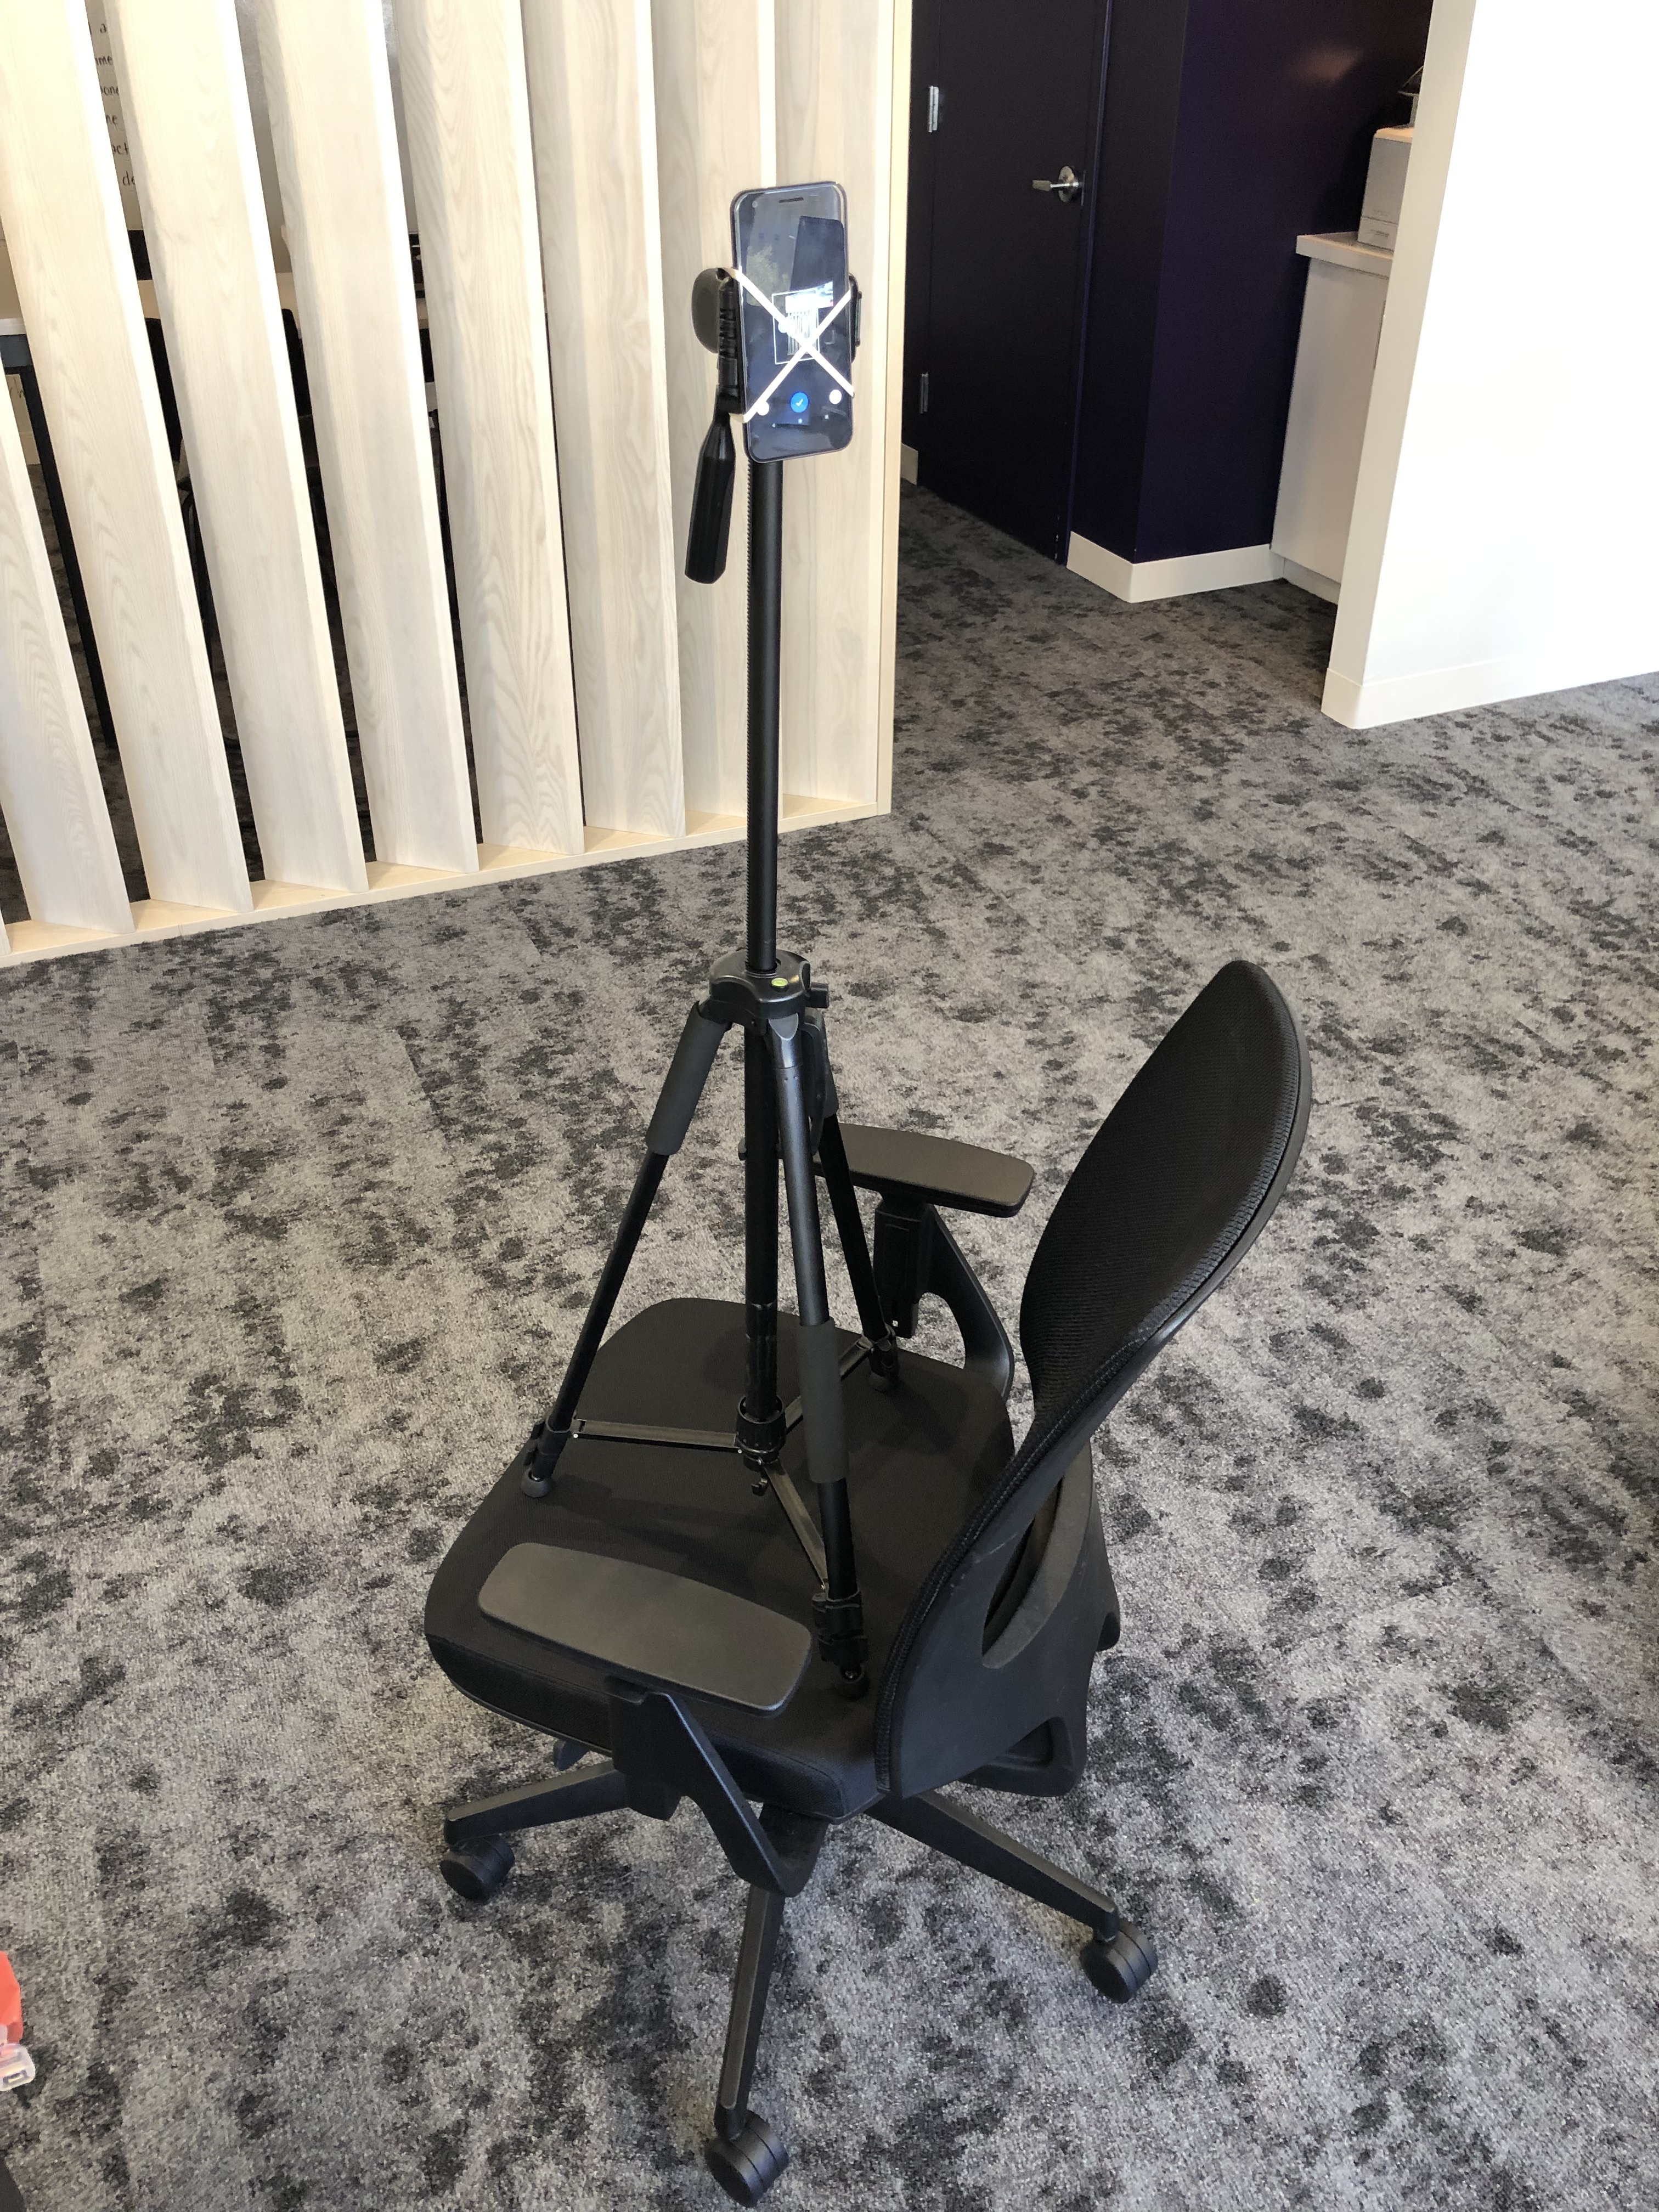 Chair with a tripod on it holding a
camera